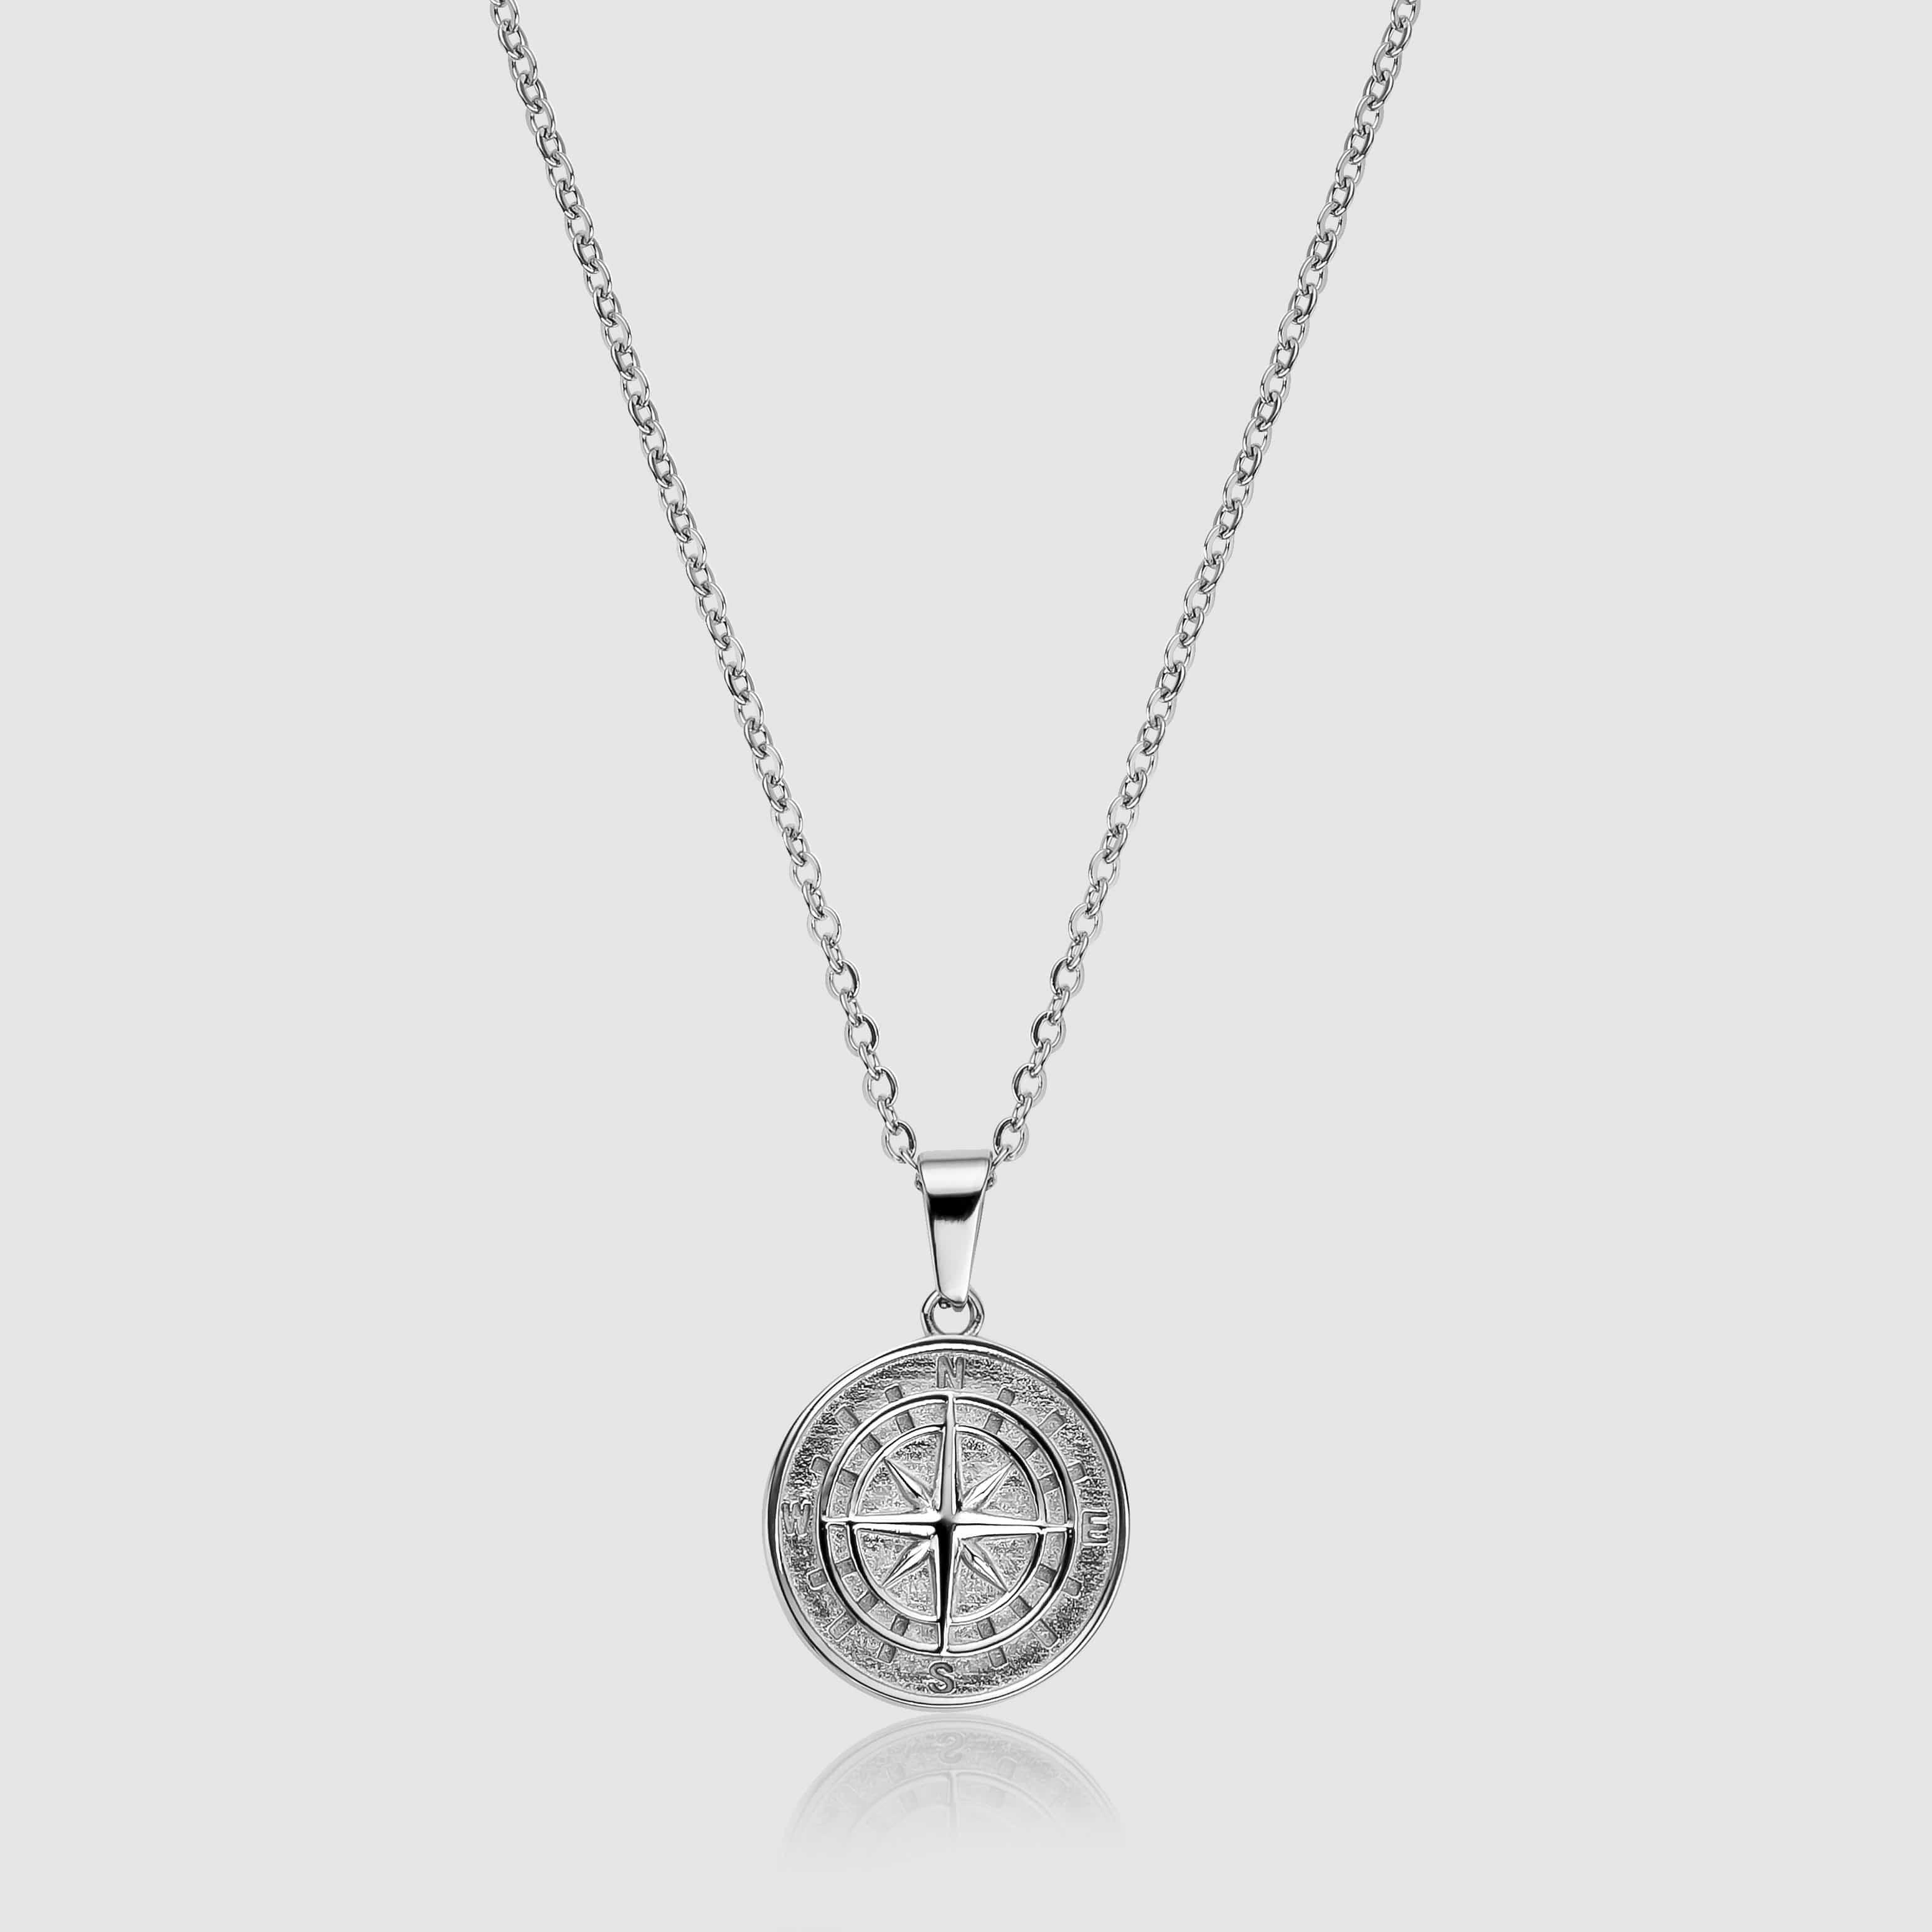 Compass Pendant Necklace for Women Sterling Silver Inspirational Neckl